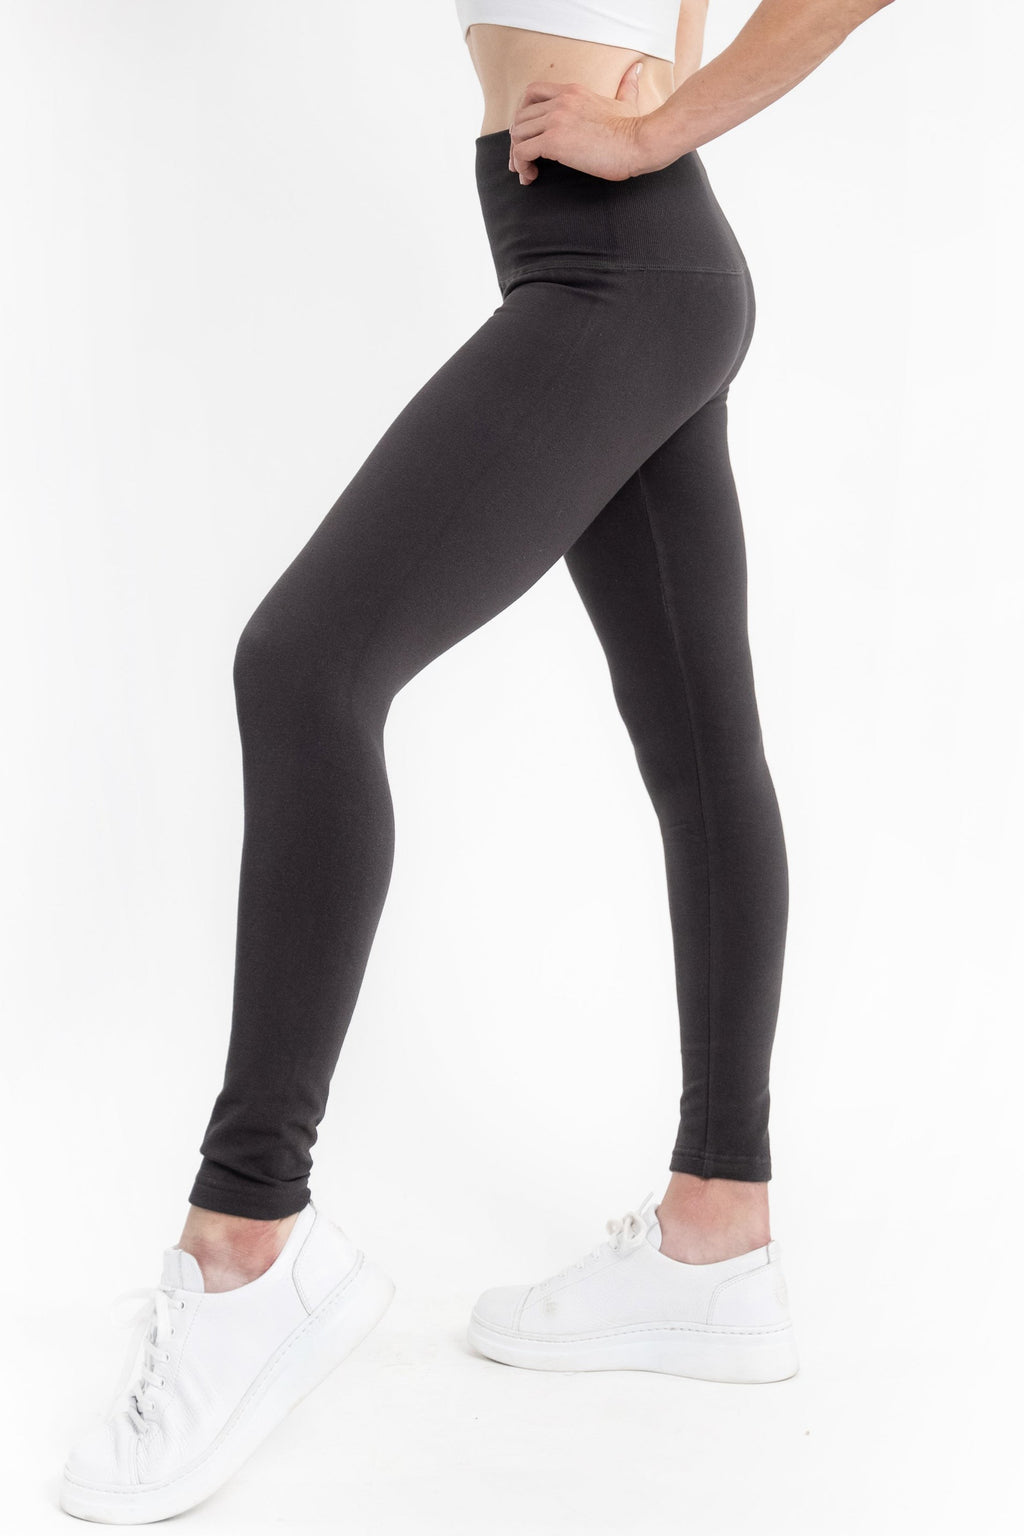 High Waisted Control Top Leggings - Charcoal